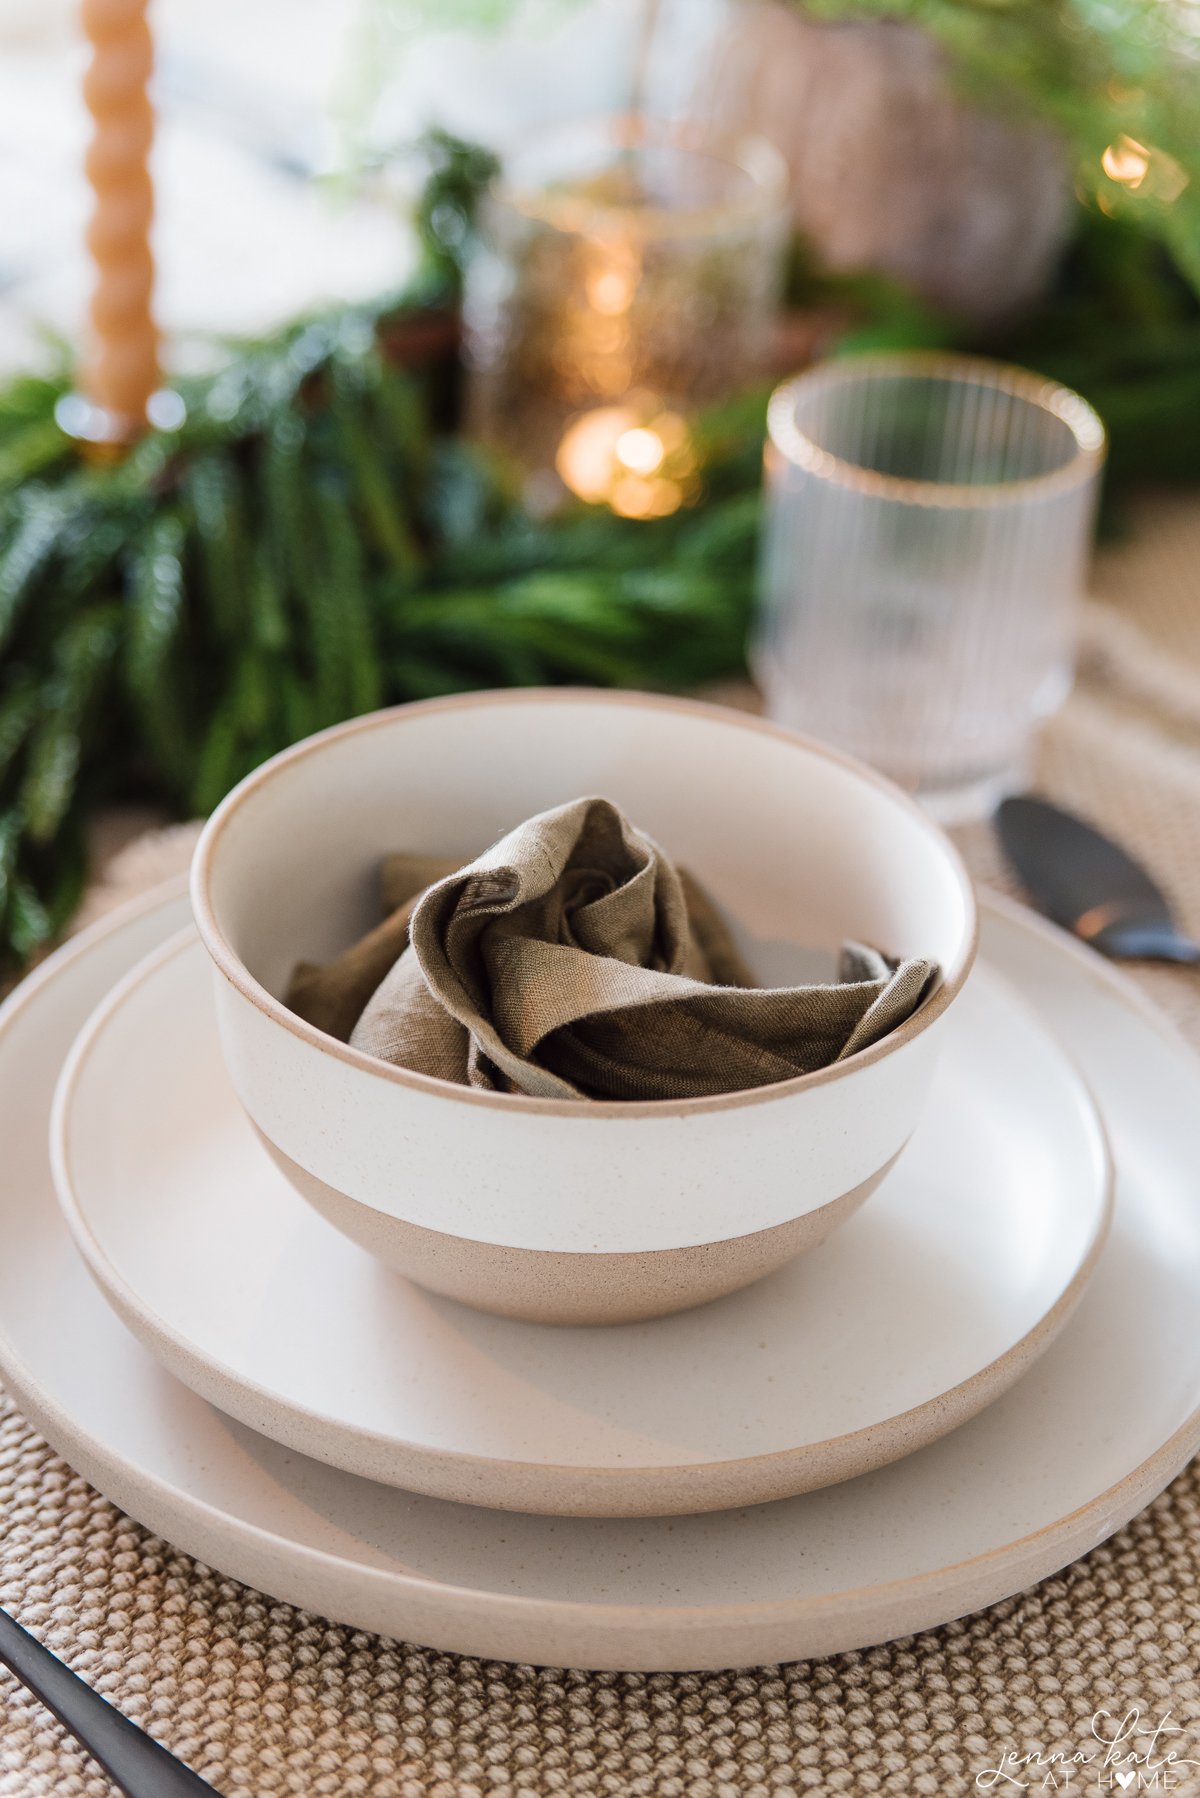 Amazon french linen napkin swirled into a rosette inside a bowl